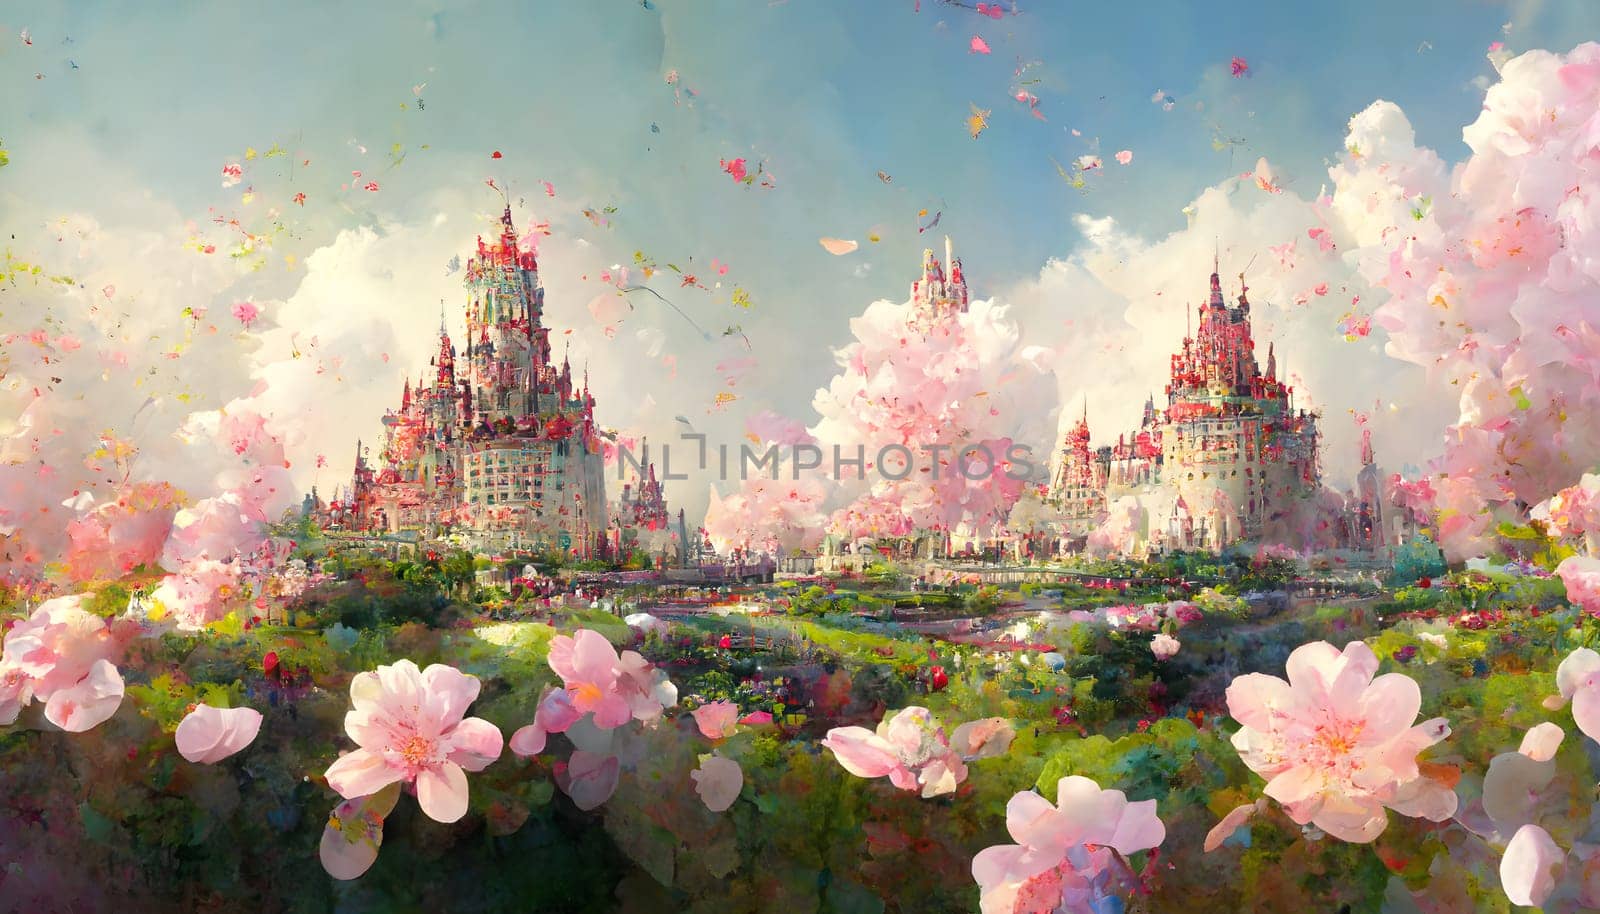 dreamy castles at sunny spring day with pink flowers in foreground, neural network generated art. Digitally generated image. Not based on any actual scene or pattern.